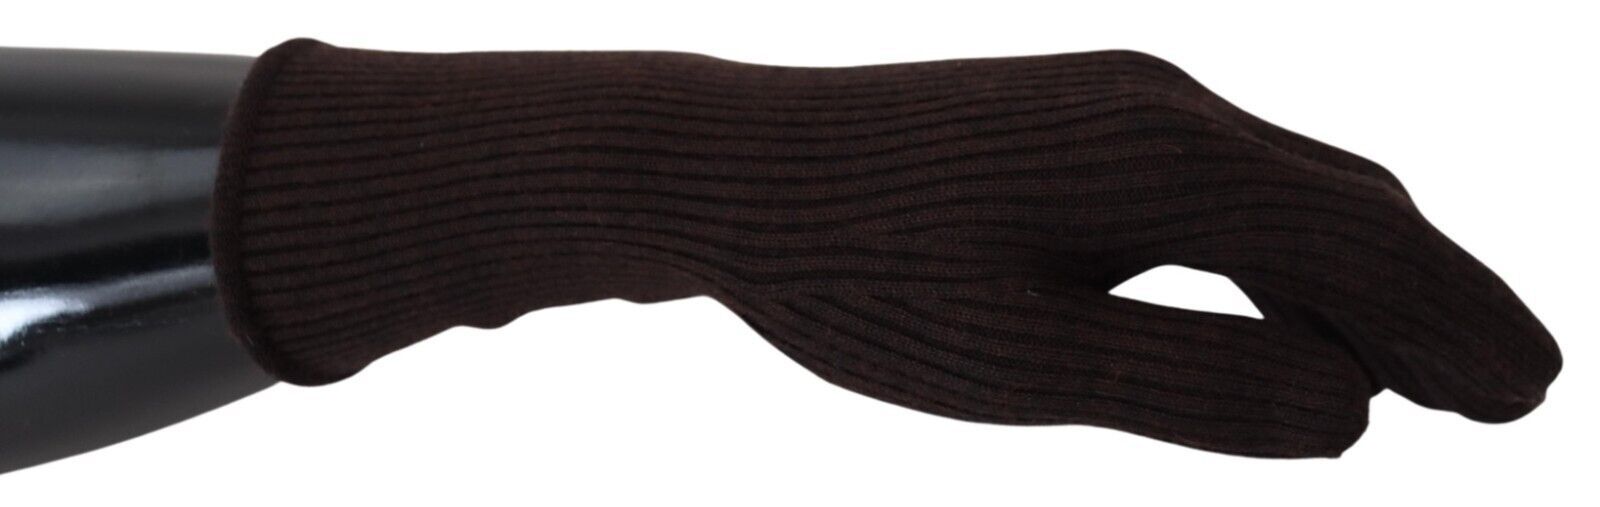 Dolce & Gabbana Brown Cashmere Silk Hands Mitten Mens Gloves - Designed by Dolce & Gabbana Available to Buy at a Discounted Price on Moon Behind The Hill Online Designer Discount Store